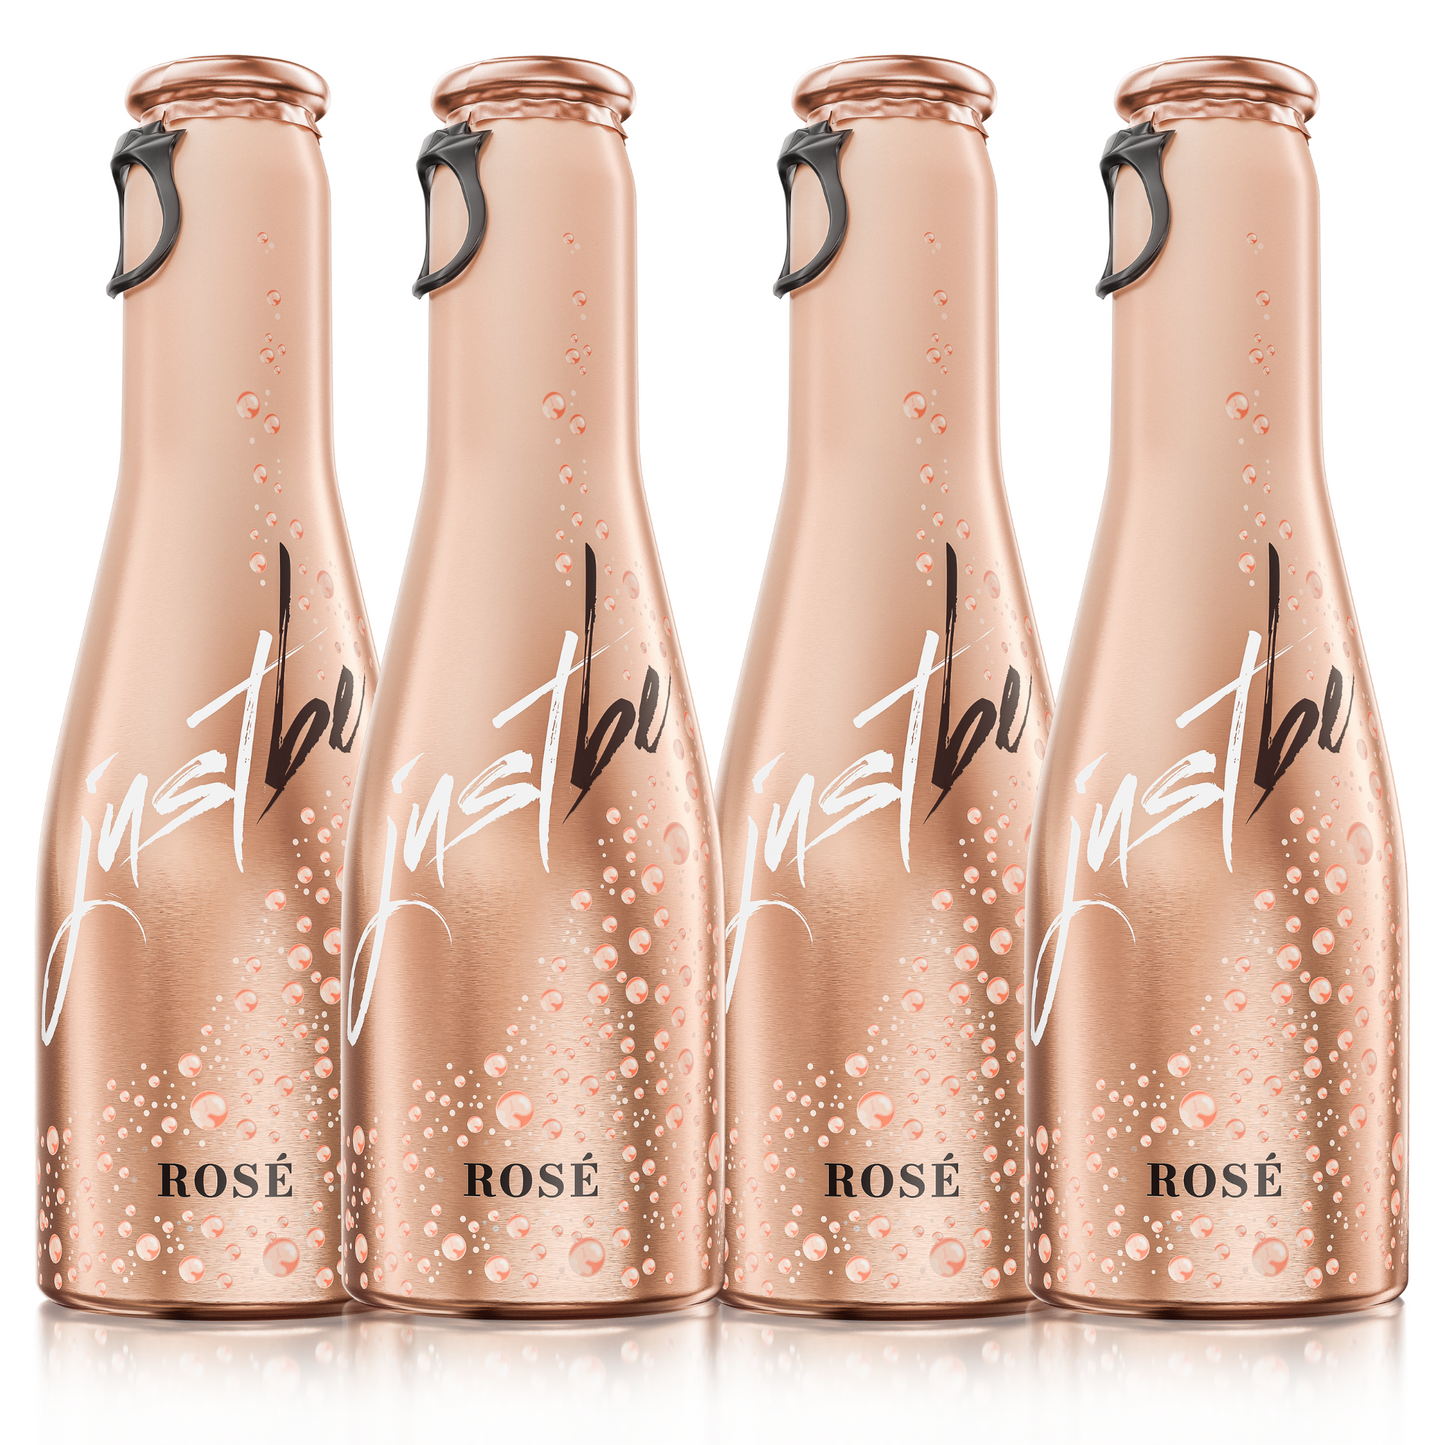 JustBe Rosé 🆓 alcohol-free - gift set of 4s in white 